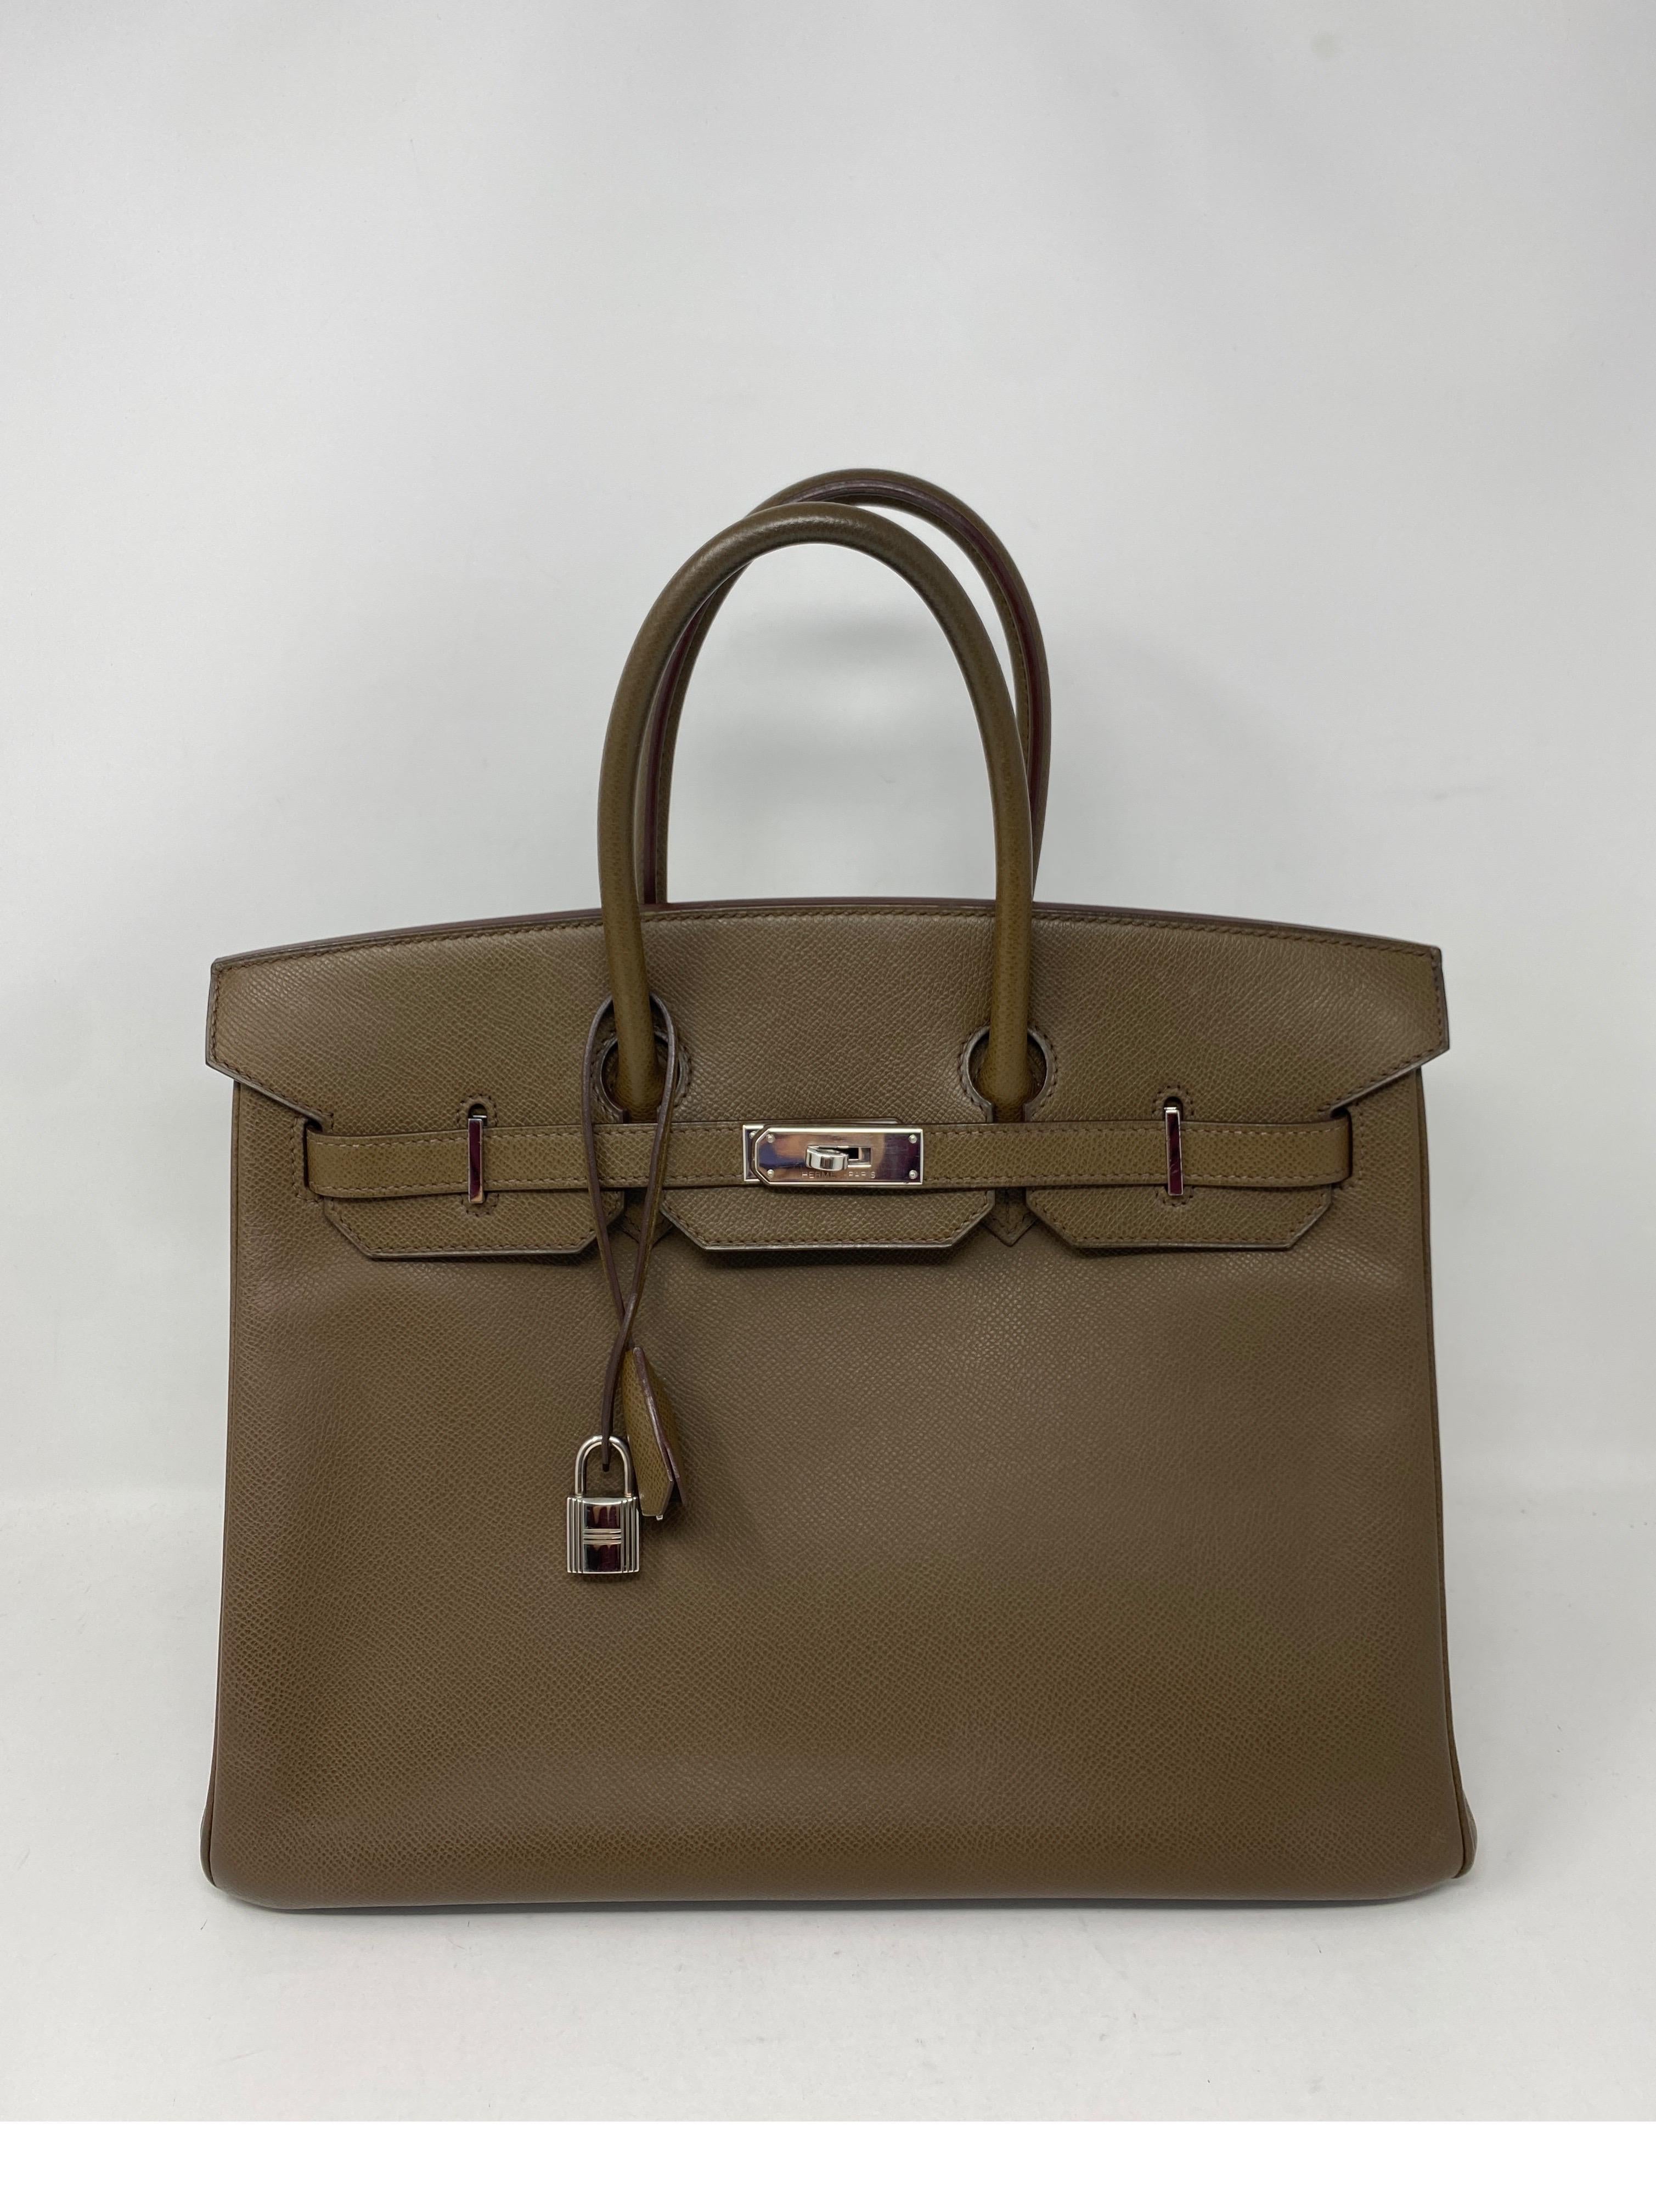 Hermes Birkin Taupe 35 Bag. Palladium hardware. Excellent condition. Very nice neutral color bag. Epsom leather. Don't miss out on this one. Includes clochette, lock, keys, and dust cover. Guaranteed authentic. 